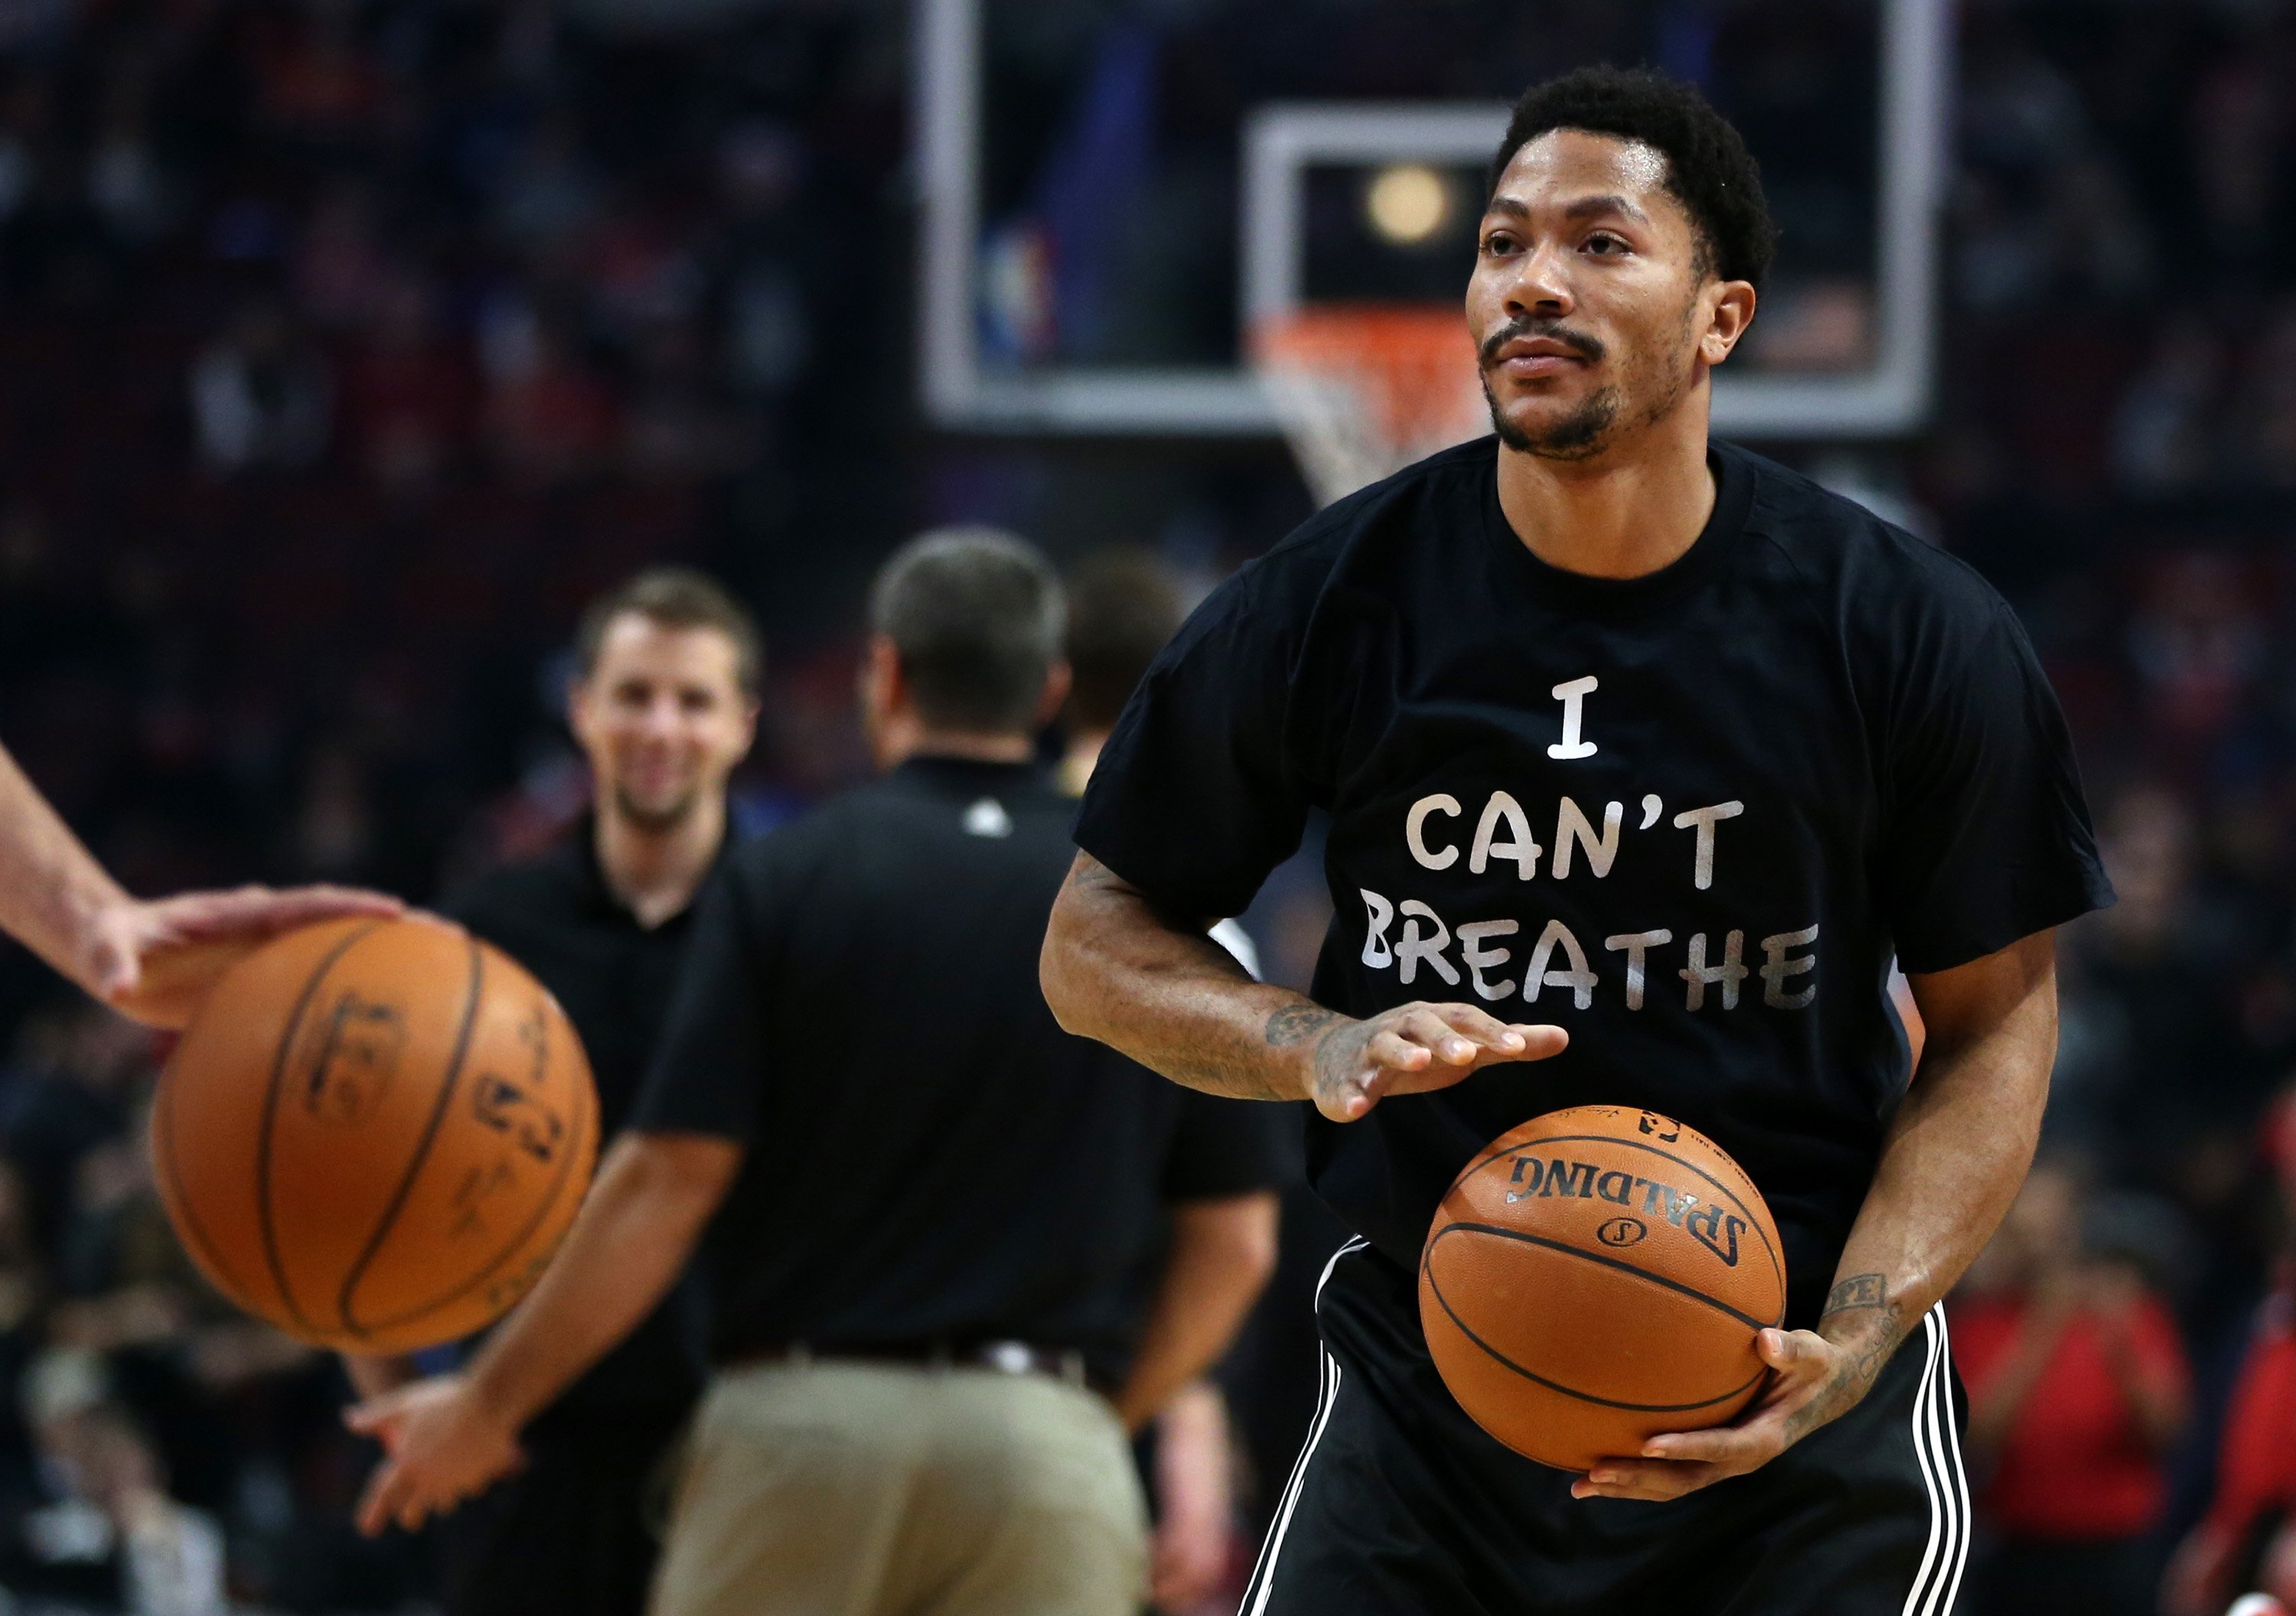 Chicago Bulls guard Derrick Rose wears a shirt reading "I Can't Breath" while warming up for a game against the Golden State Warriors on Dec. 6, 2014 at the United Center in Chicago. (Chris Sweda—Chicago Tribune/Landov)